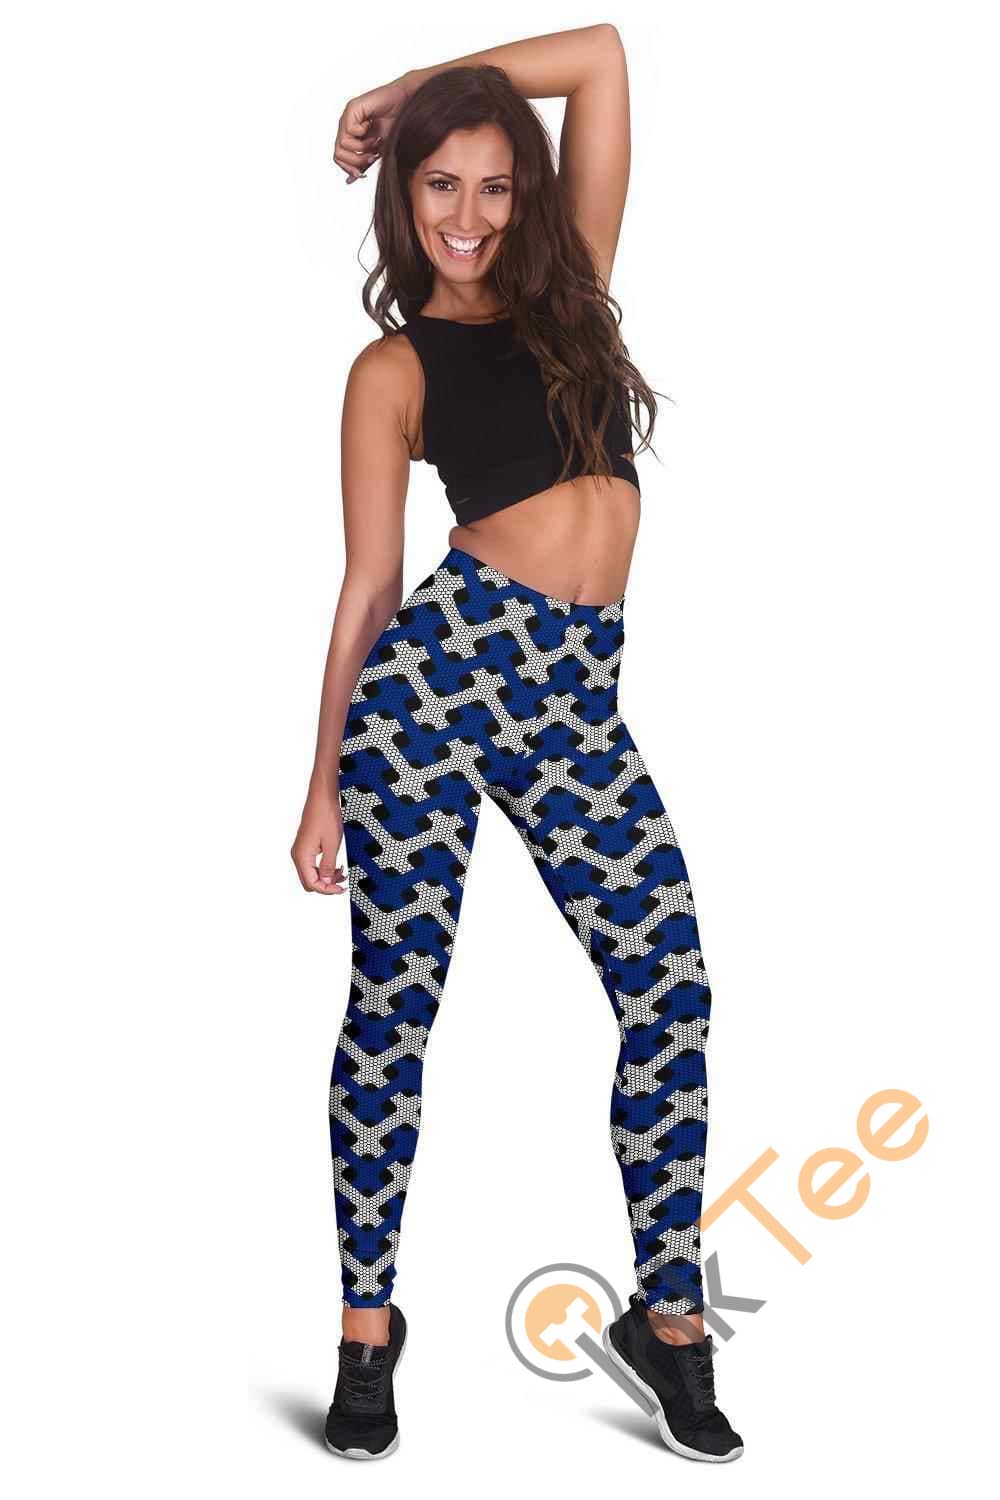 Inktee Store - Kentucky Wildcats Inspired 3D All Over Print For Yoga Fitness Fashion Women'S Leggings Image